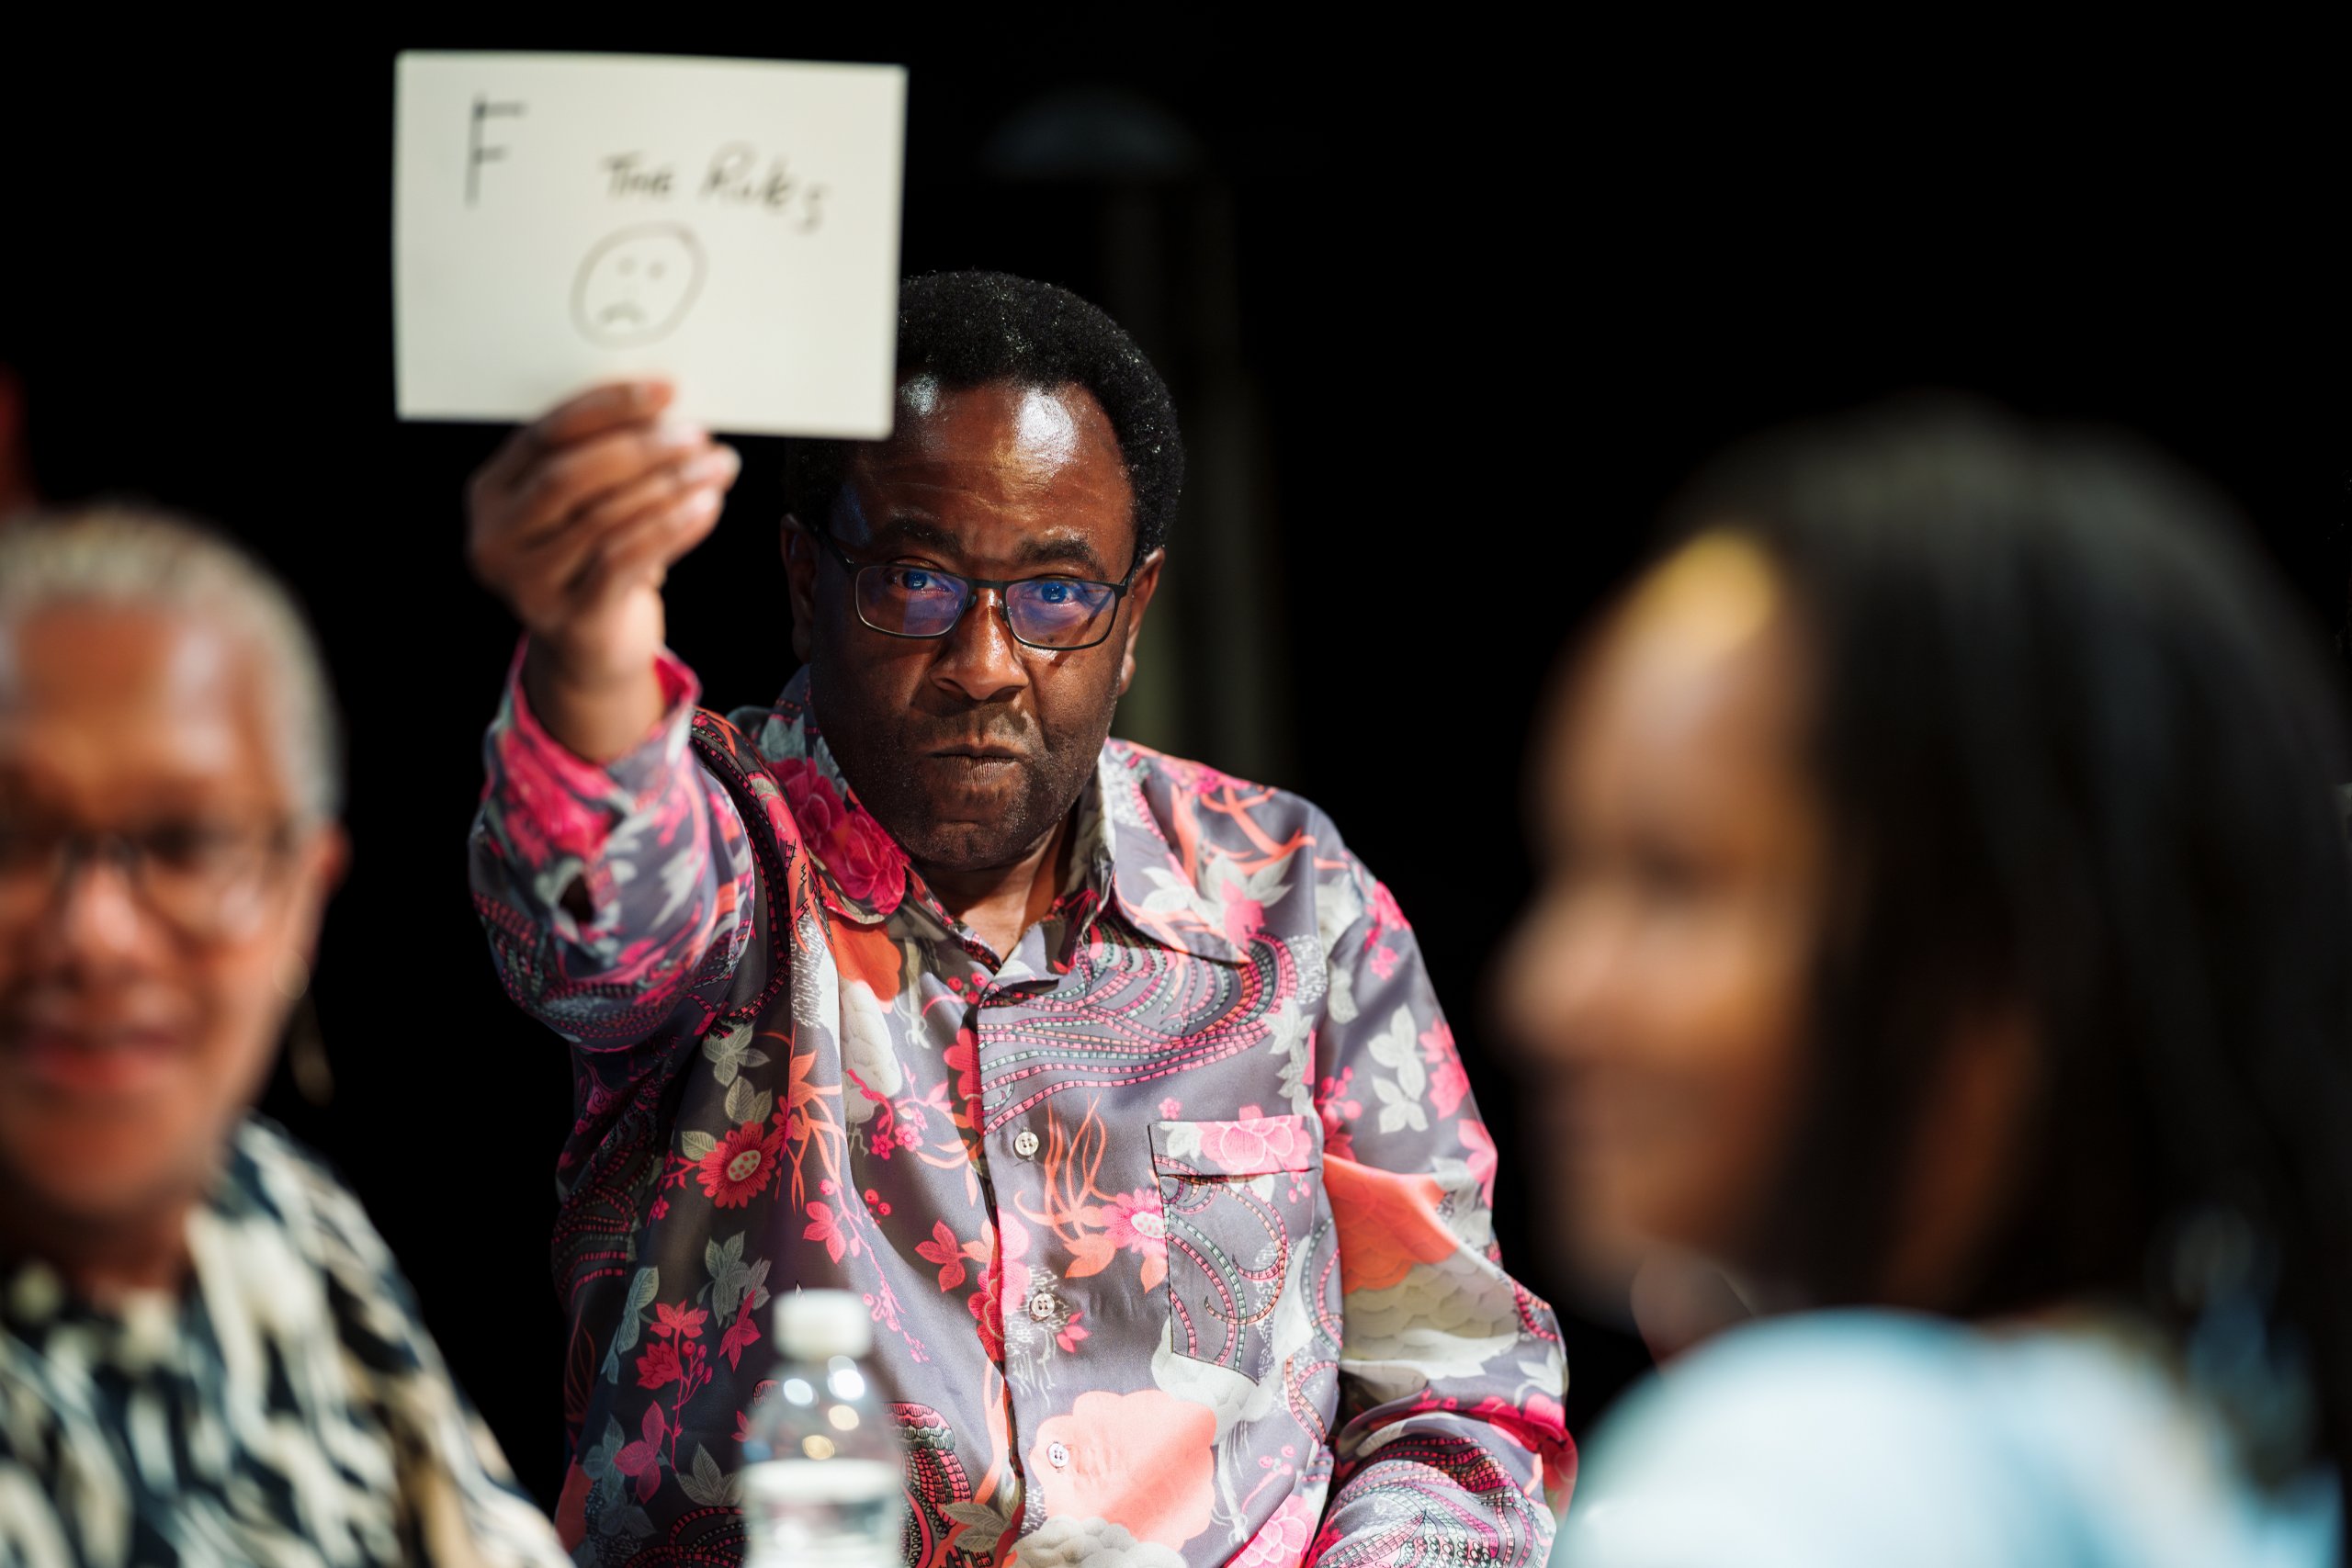 A black male, aged 40s-50s, playing 1884 at Fairfield Halls, Croydon. He is wearing a colourful, patterned shirt and looking directly at the camera with a determined facial expression. He is holding up a protest sign with ‘F the rules’ and a sad face written on it.